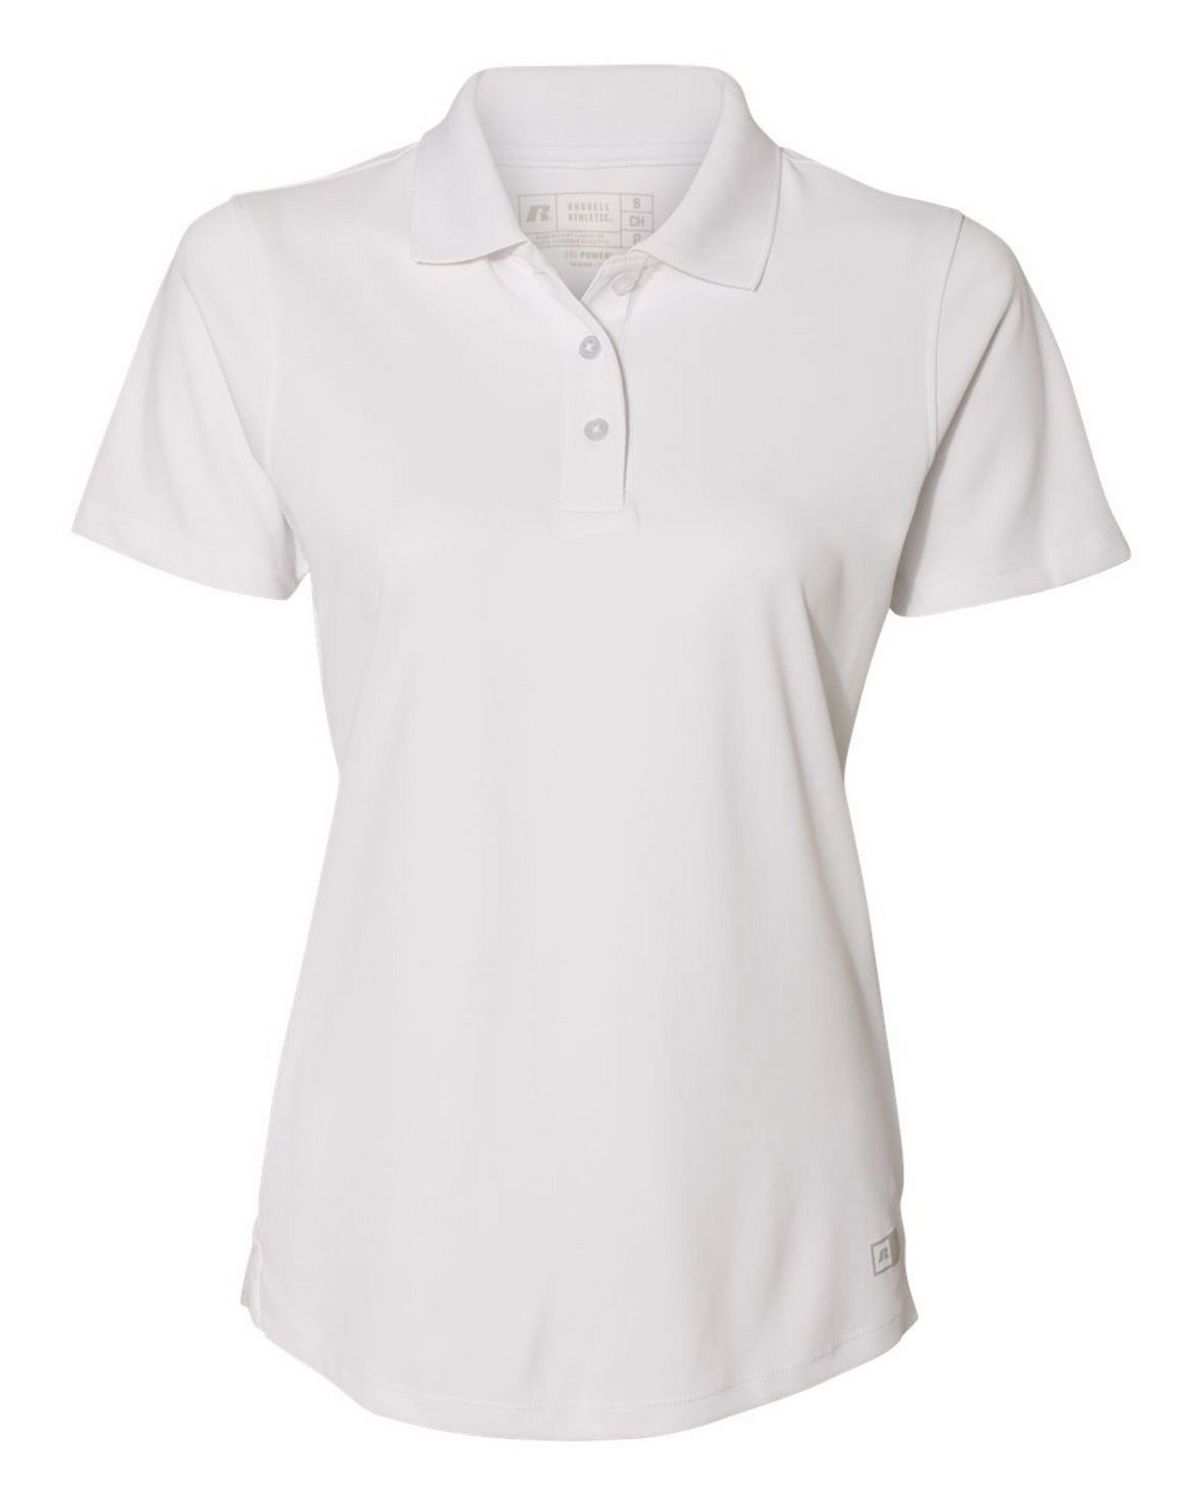 russell athletic polo shirts